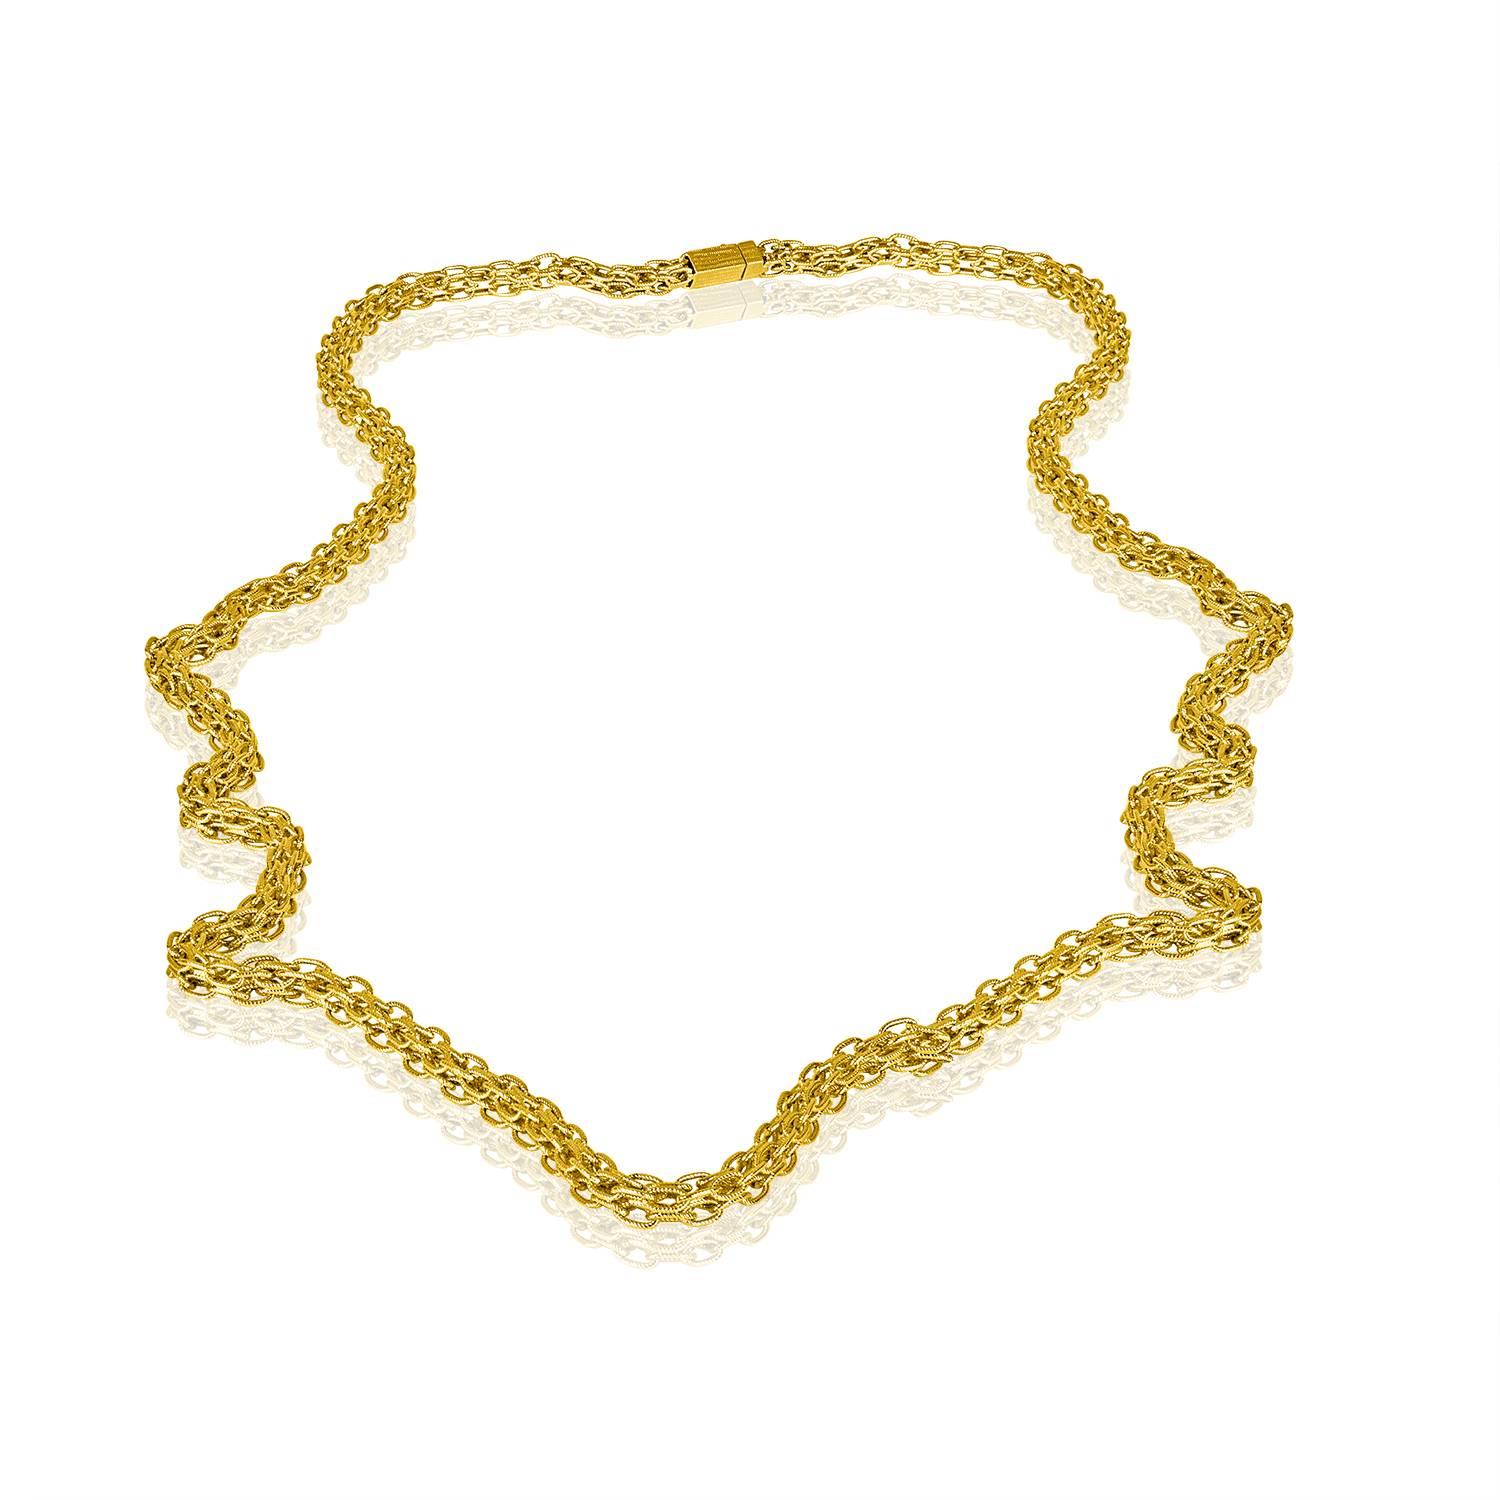 Vintage 1960's Tiffany & Co. Chain Link Heavy Chain.
The chain has Tiffany & Co. W. Germany 18K.
The chain is 18K Yellow Gold.
The chain is 40